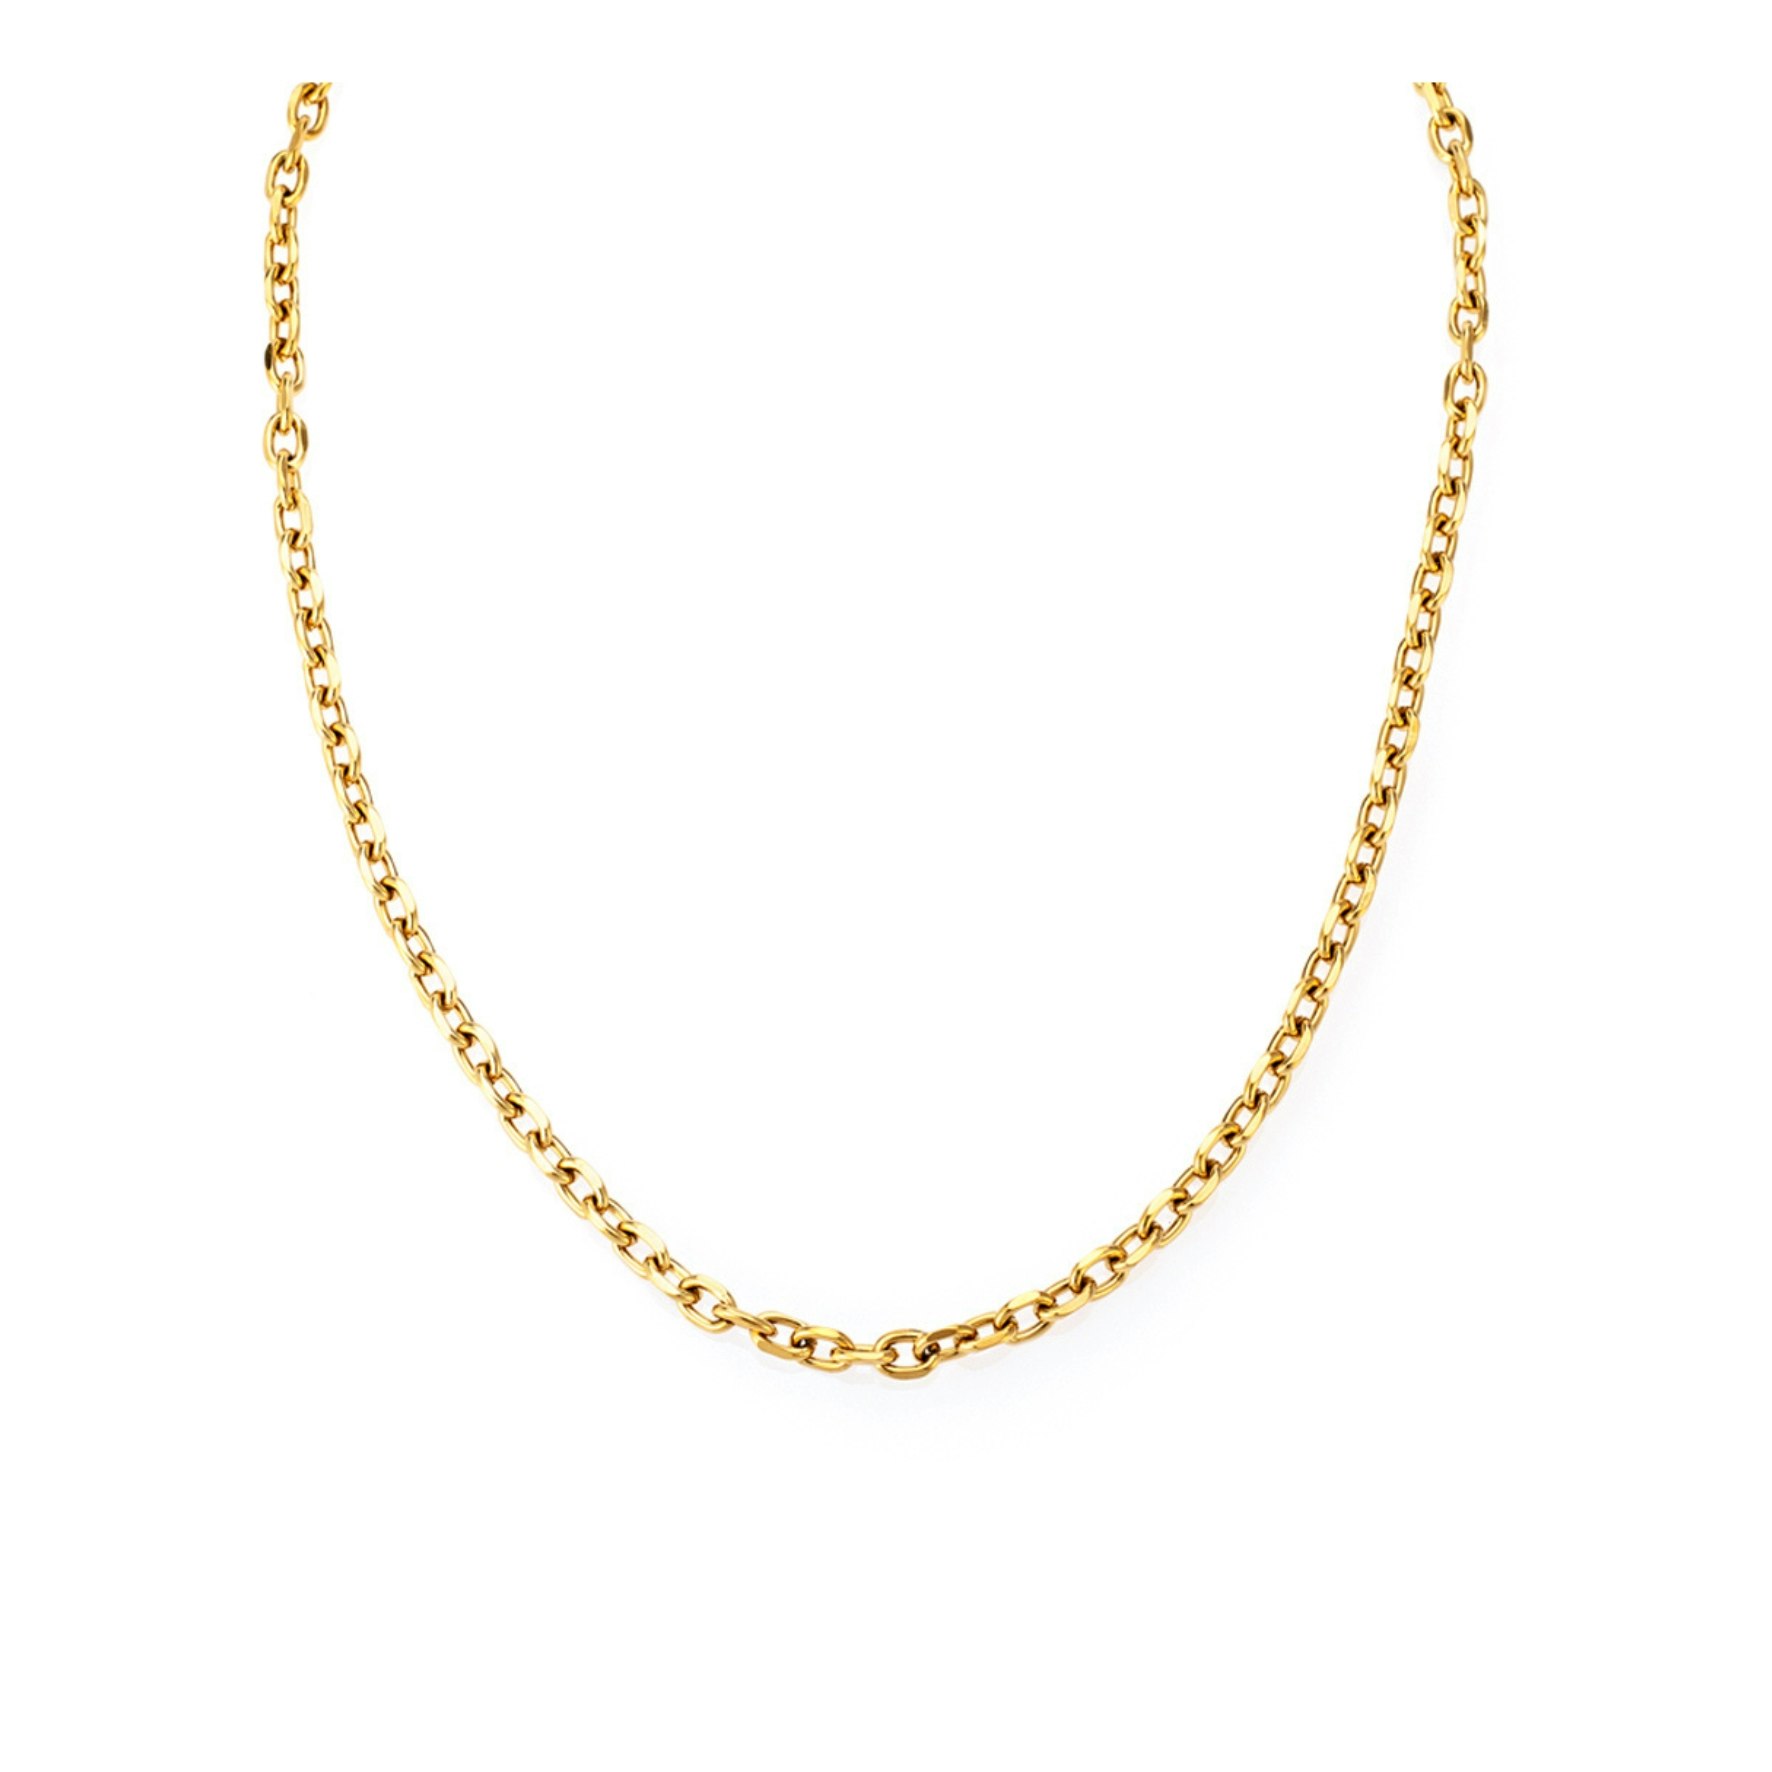 Anker Necklace from SAMIE in Goldplated stainless steel